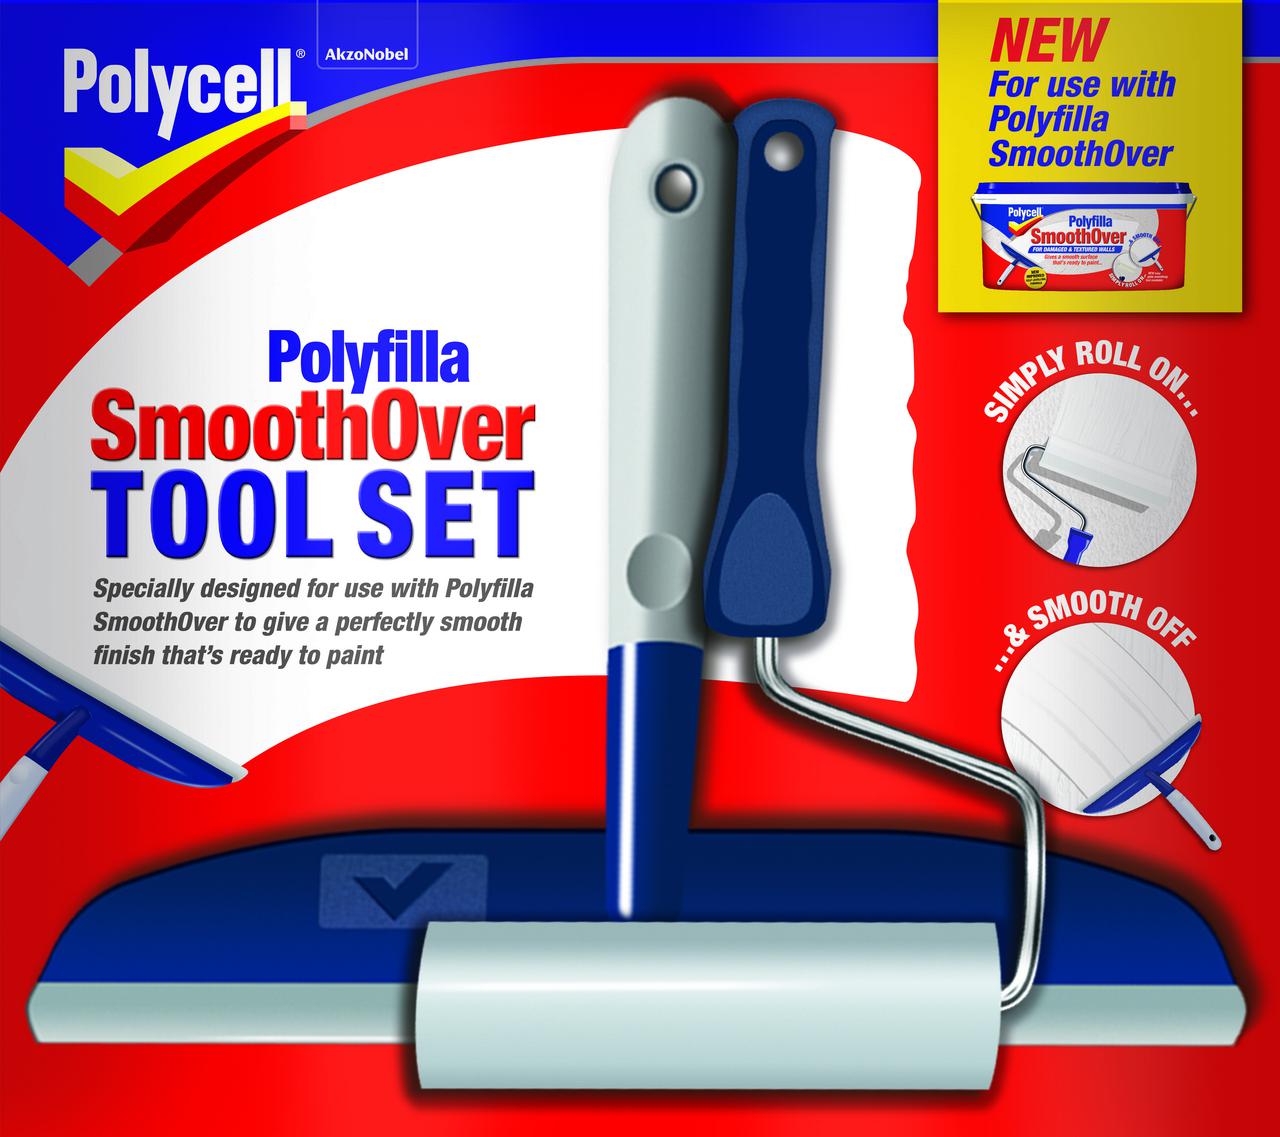 Polycell Polyfilla Smoothover Toolset